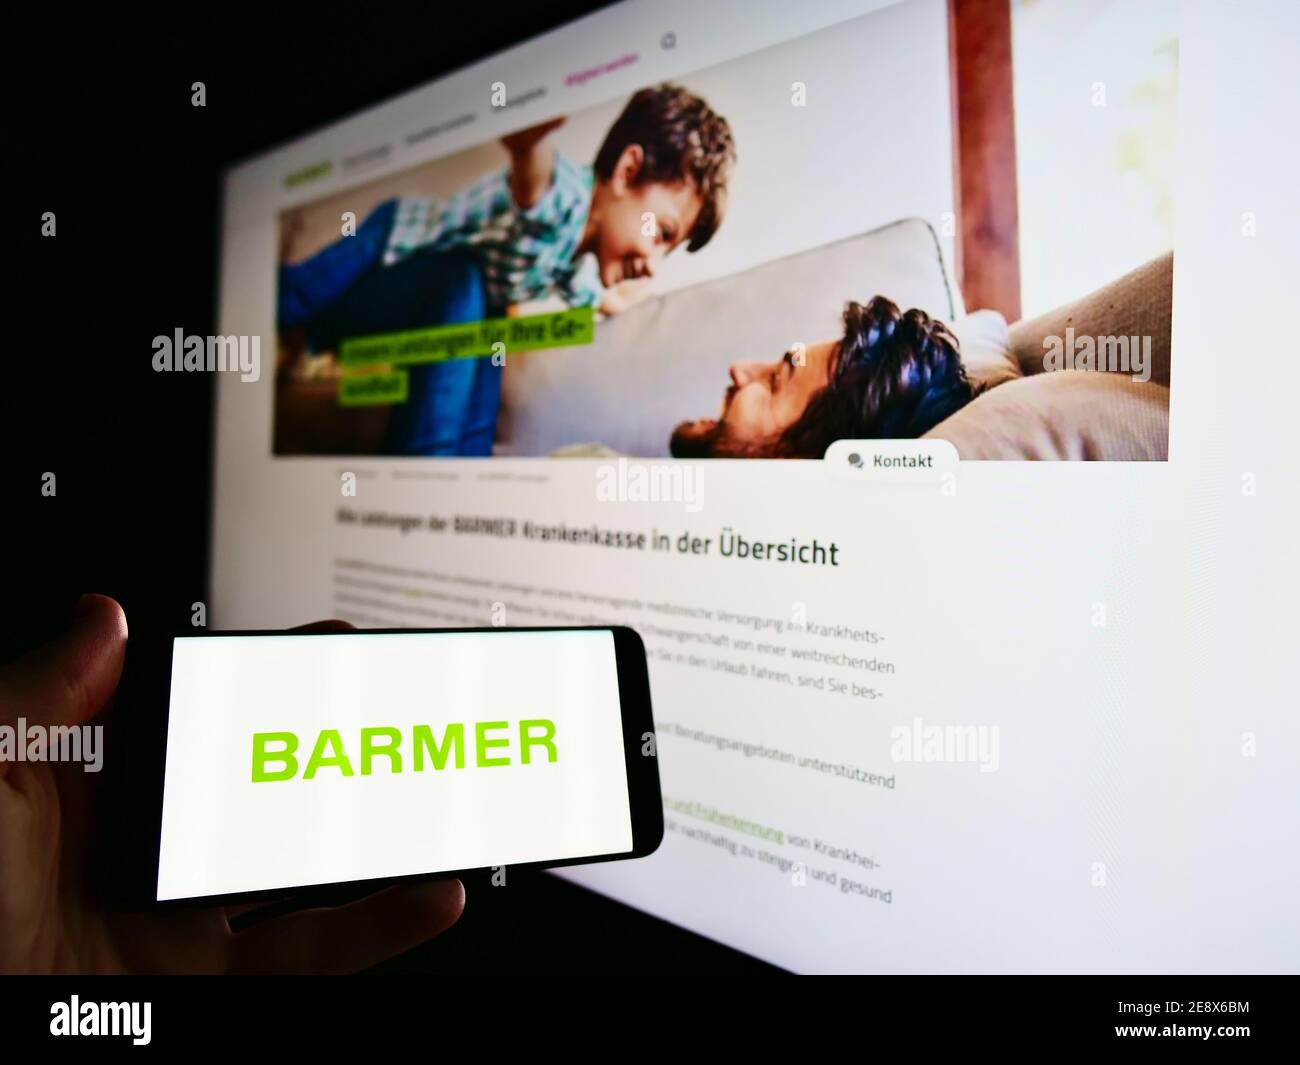 Person holding mobile phone with logo of German health insurance Barmer Ersatzkasse on display in front of company website. Focus on phone screen. Stock Photo